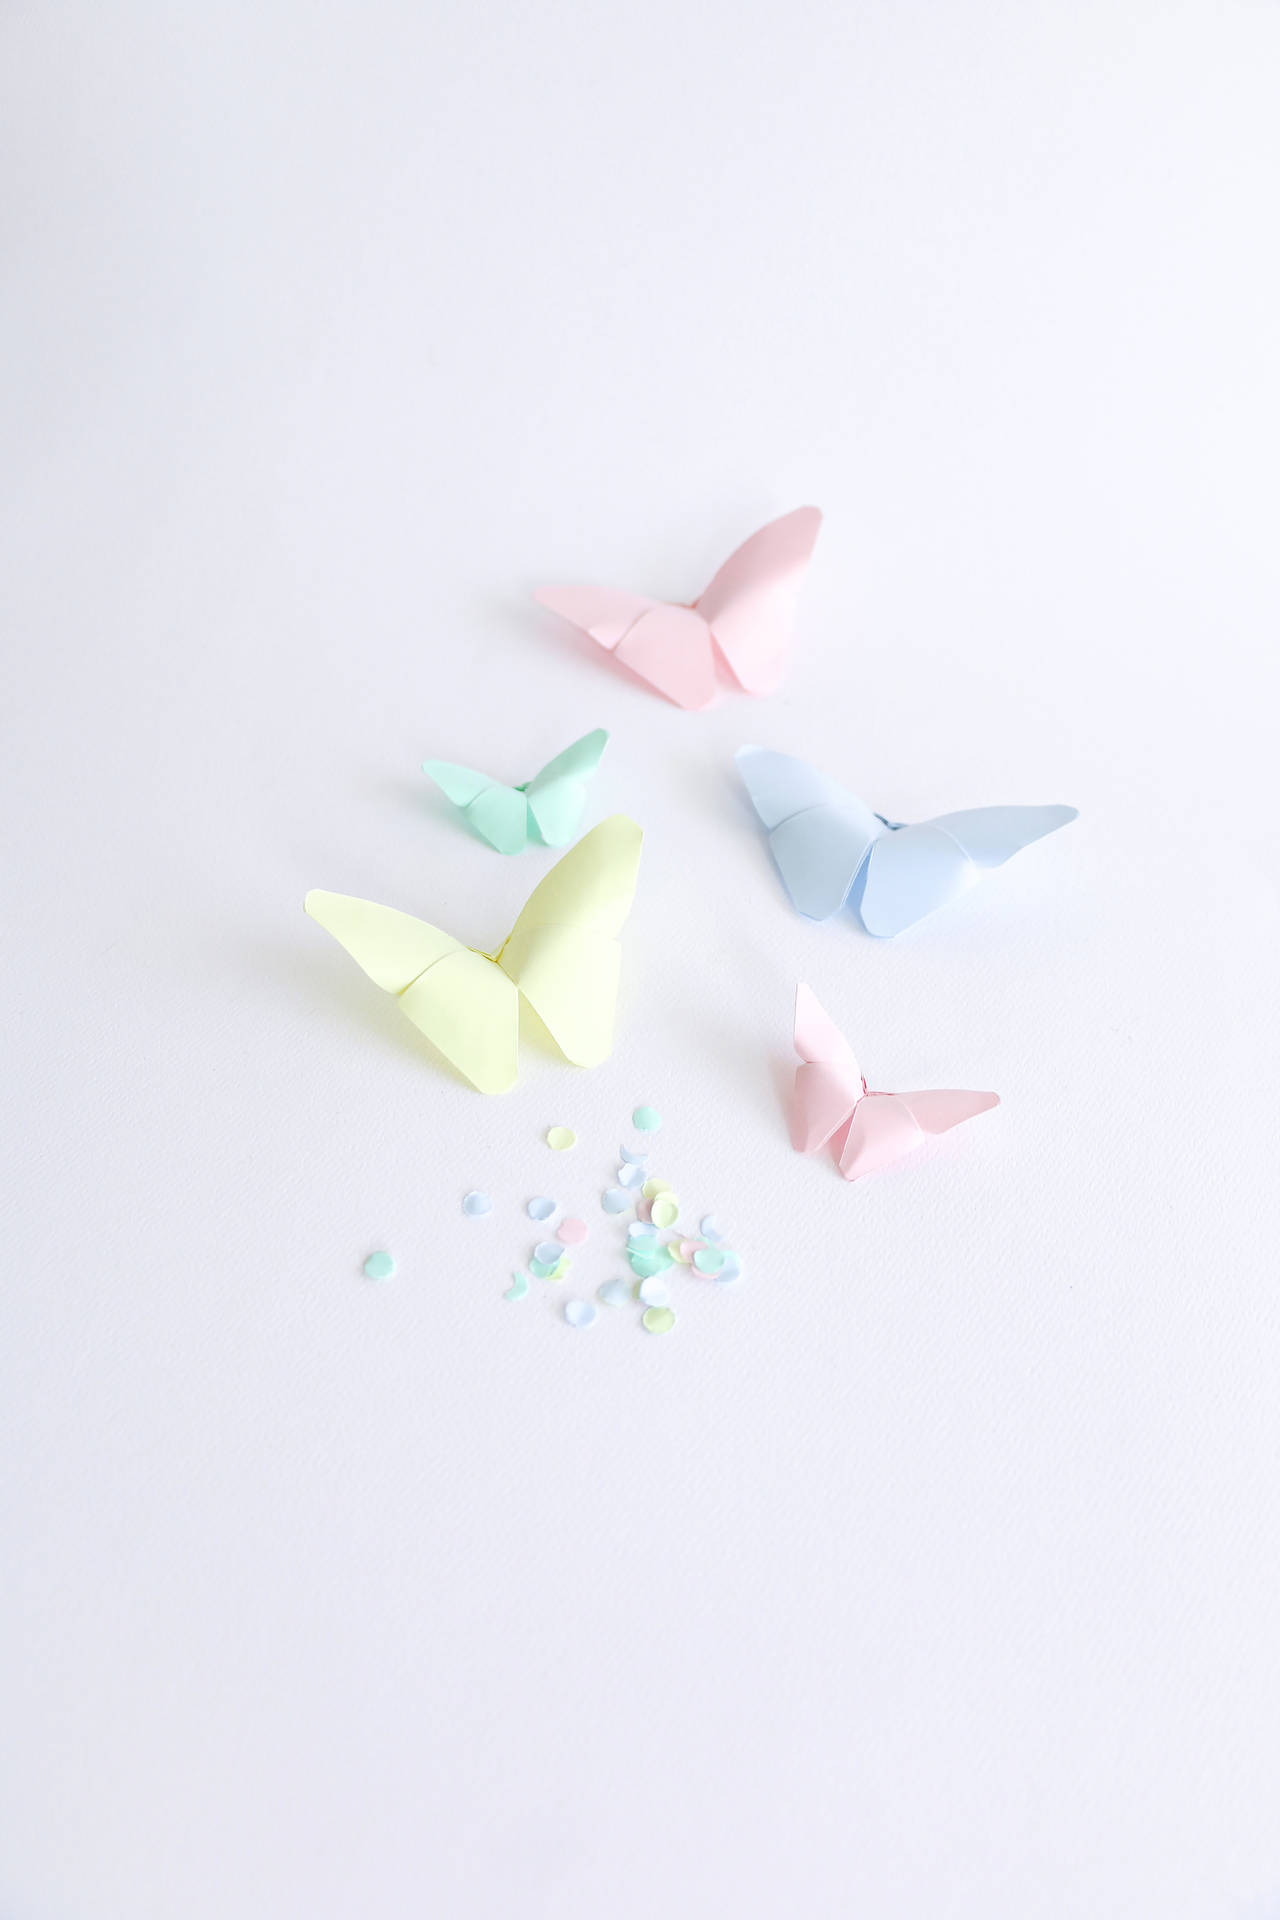 Cute Pastel Colors Origami Butterflies Background